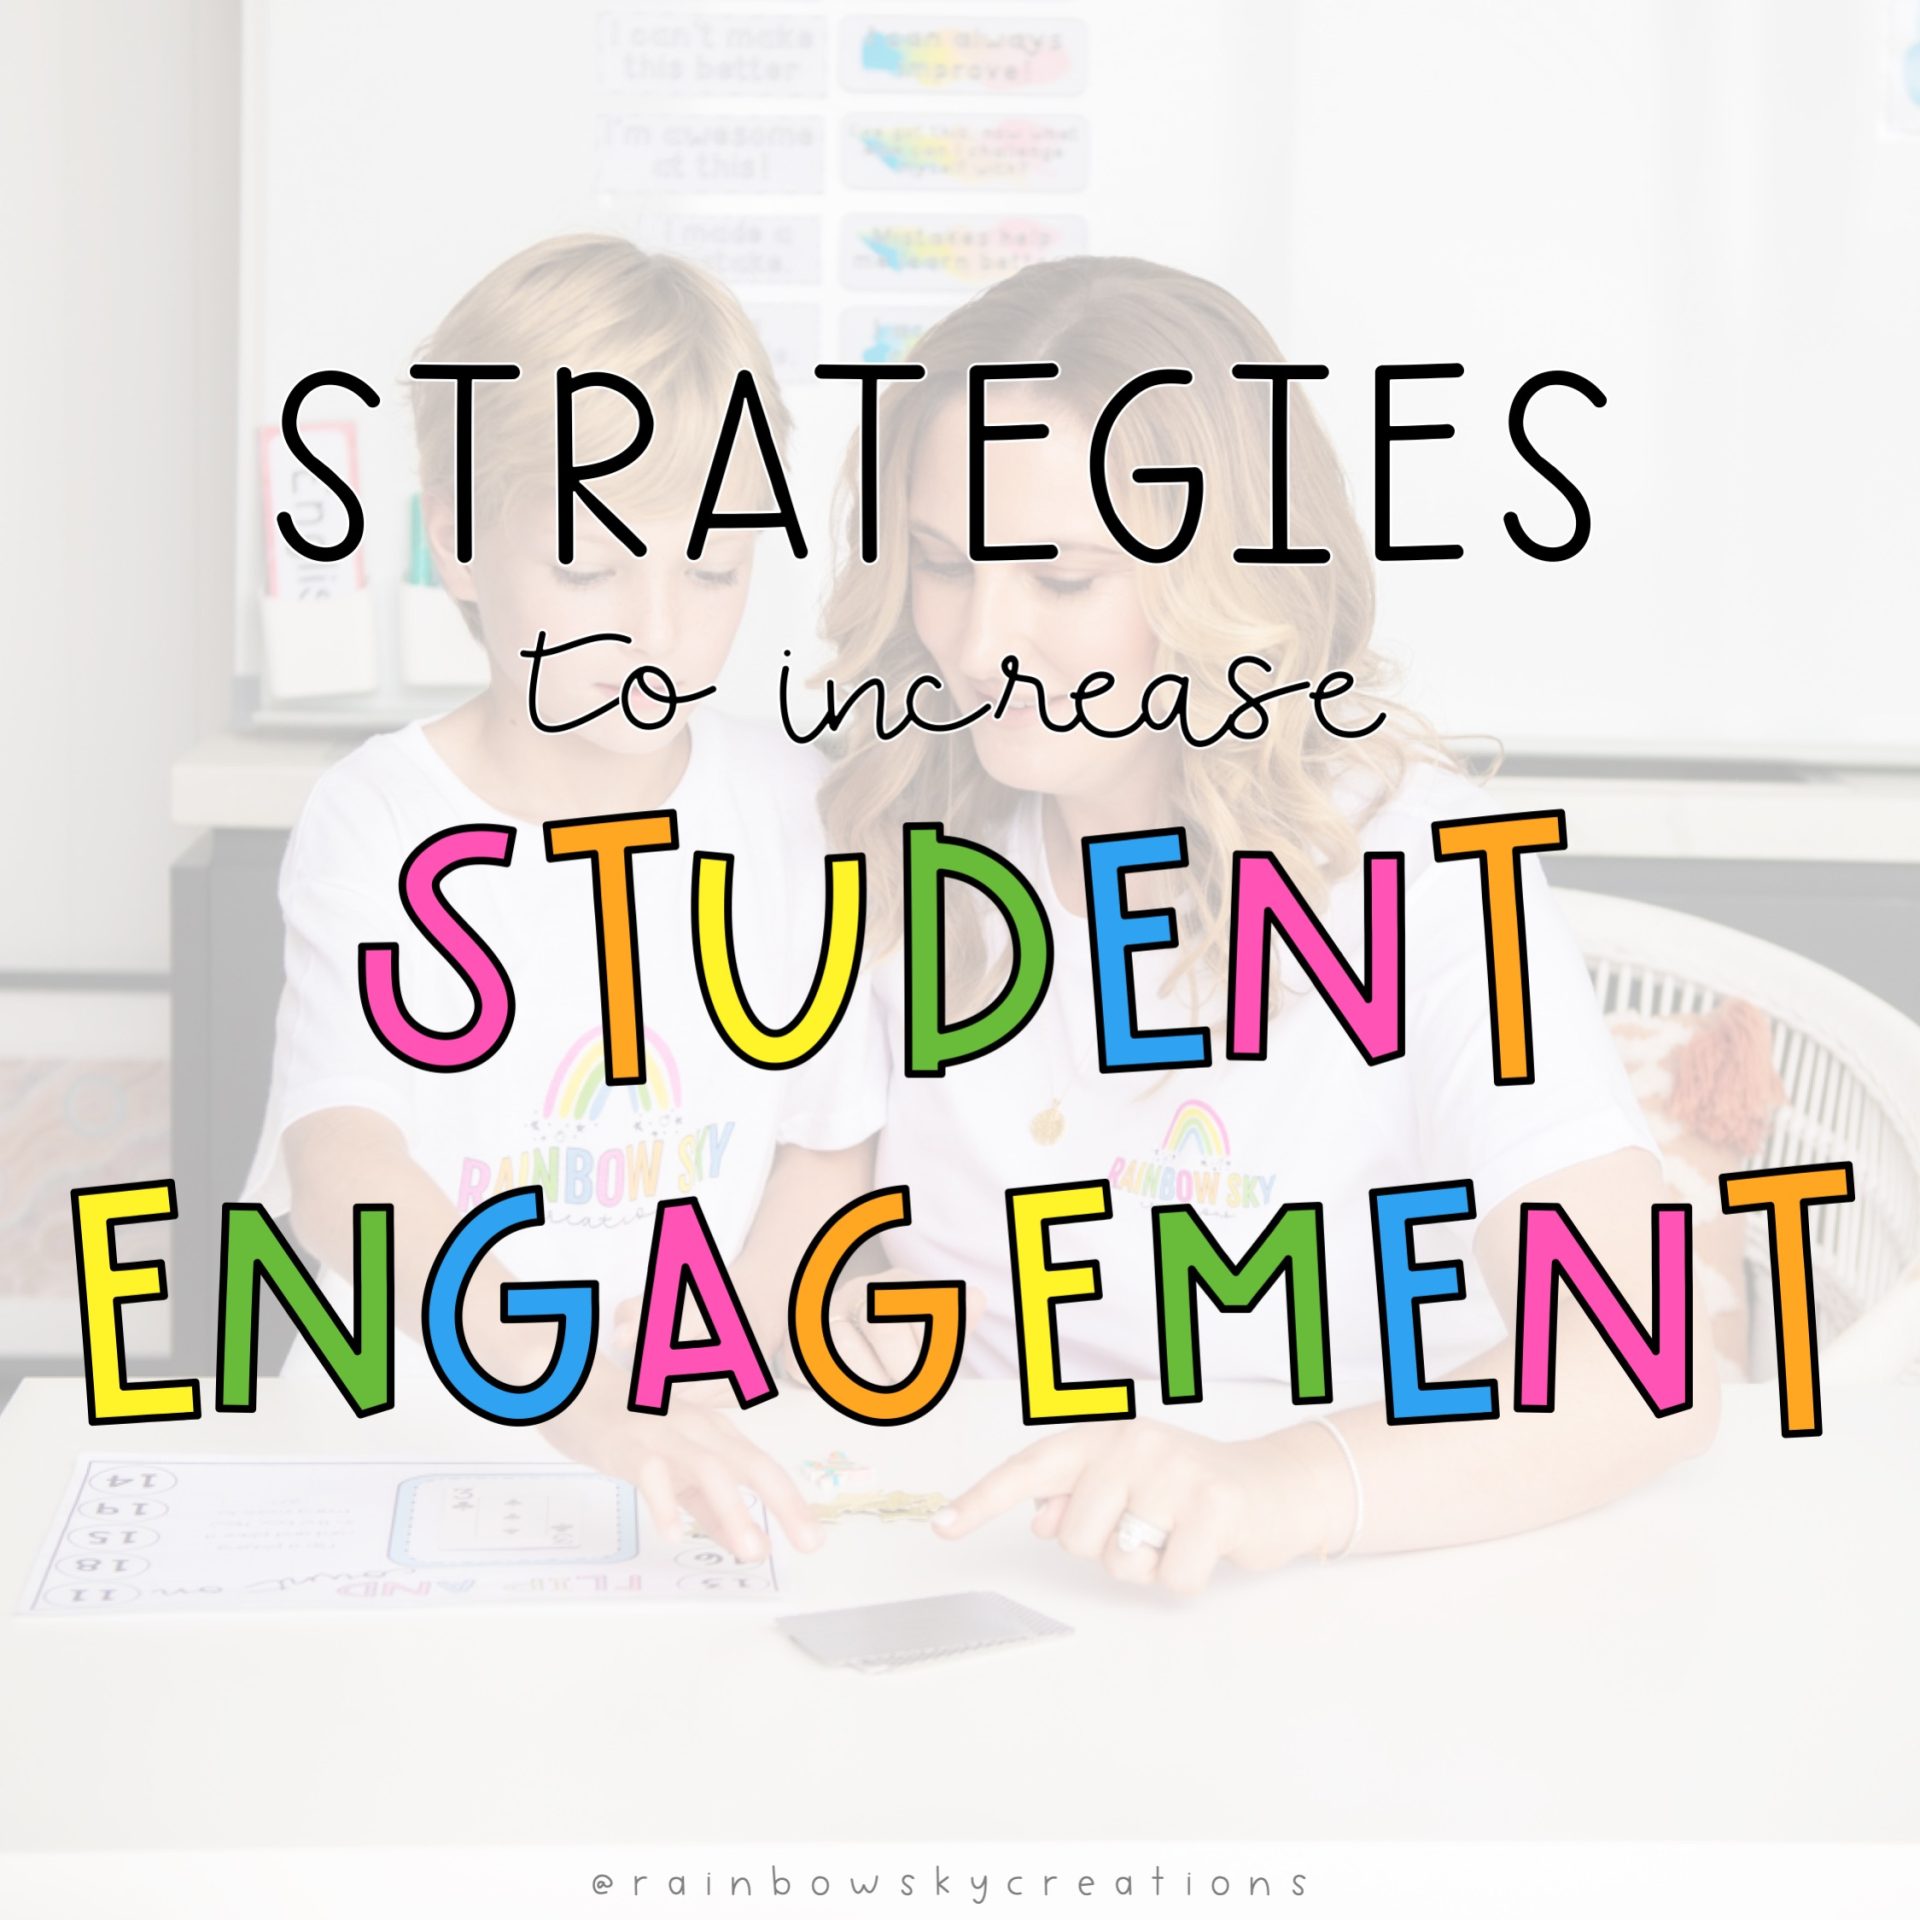 Strategies to increase student engagement